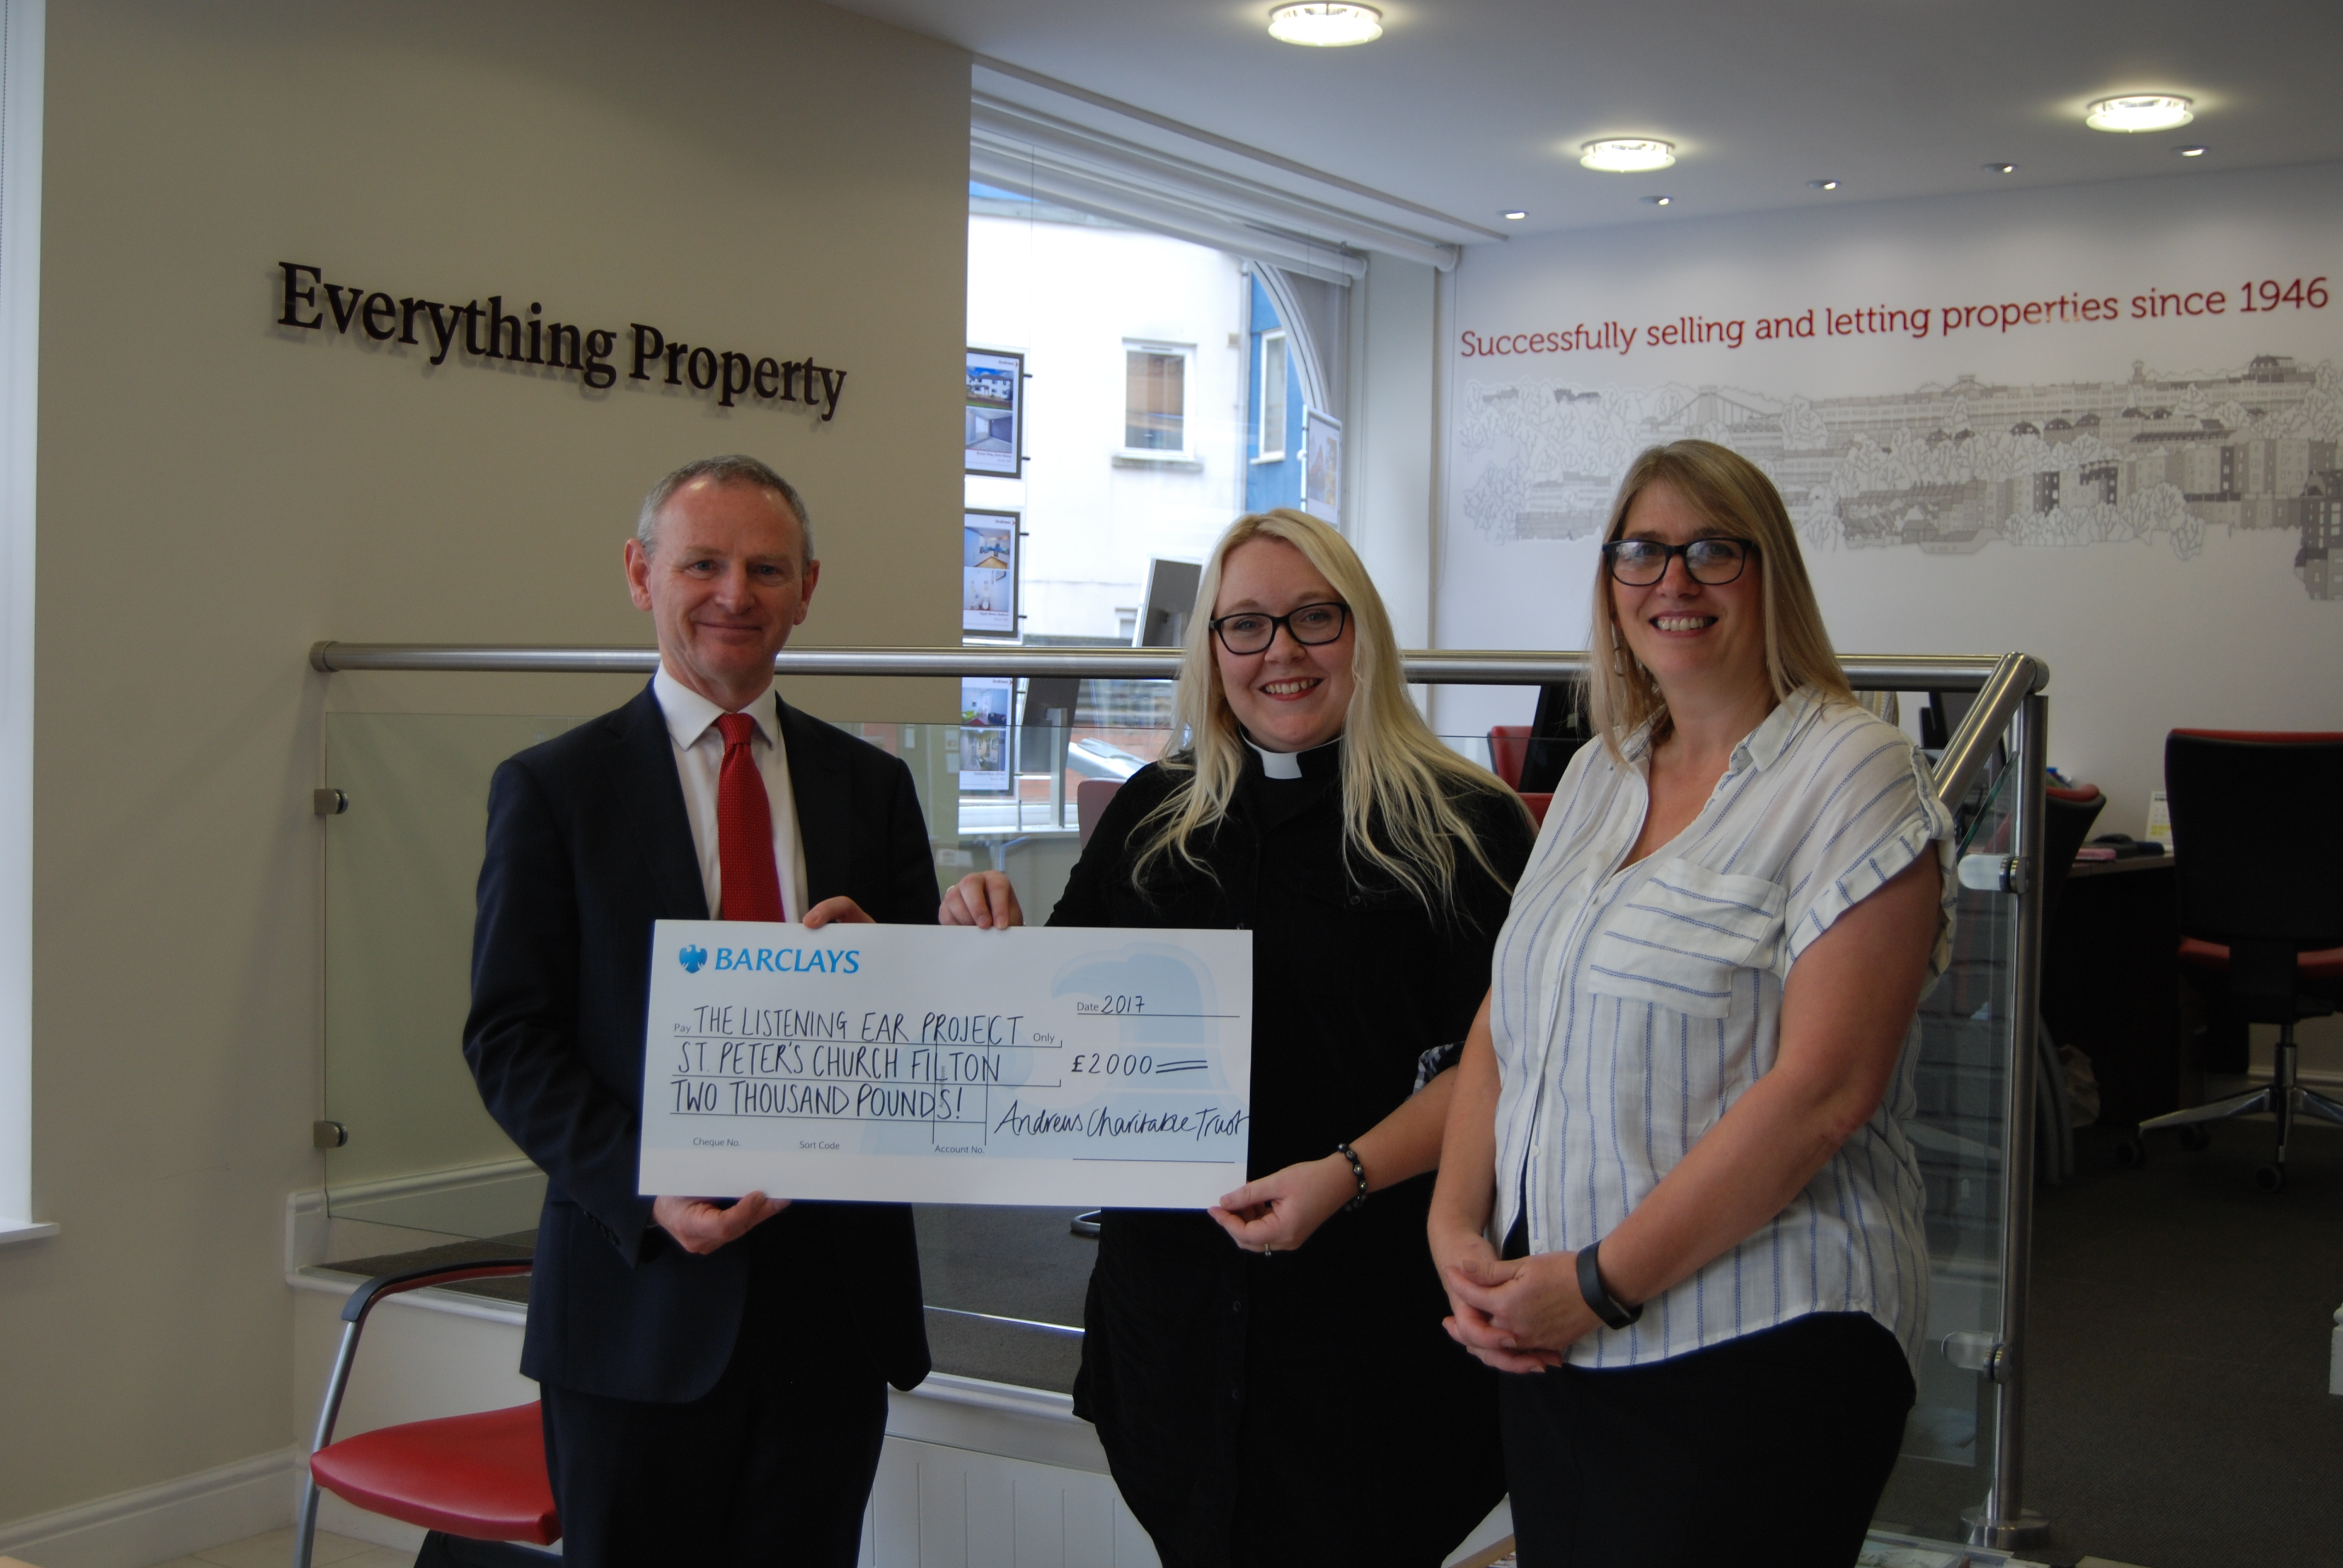 Pioneering counselling project expands with funding from Andrews Property Group trust